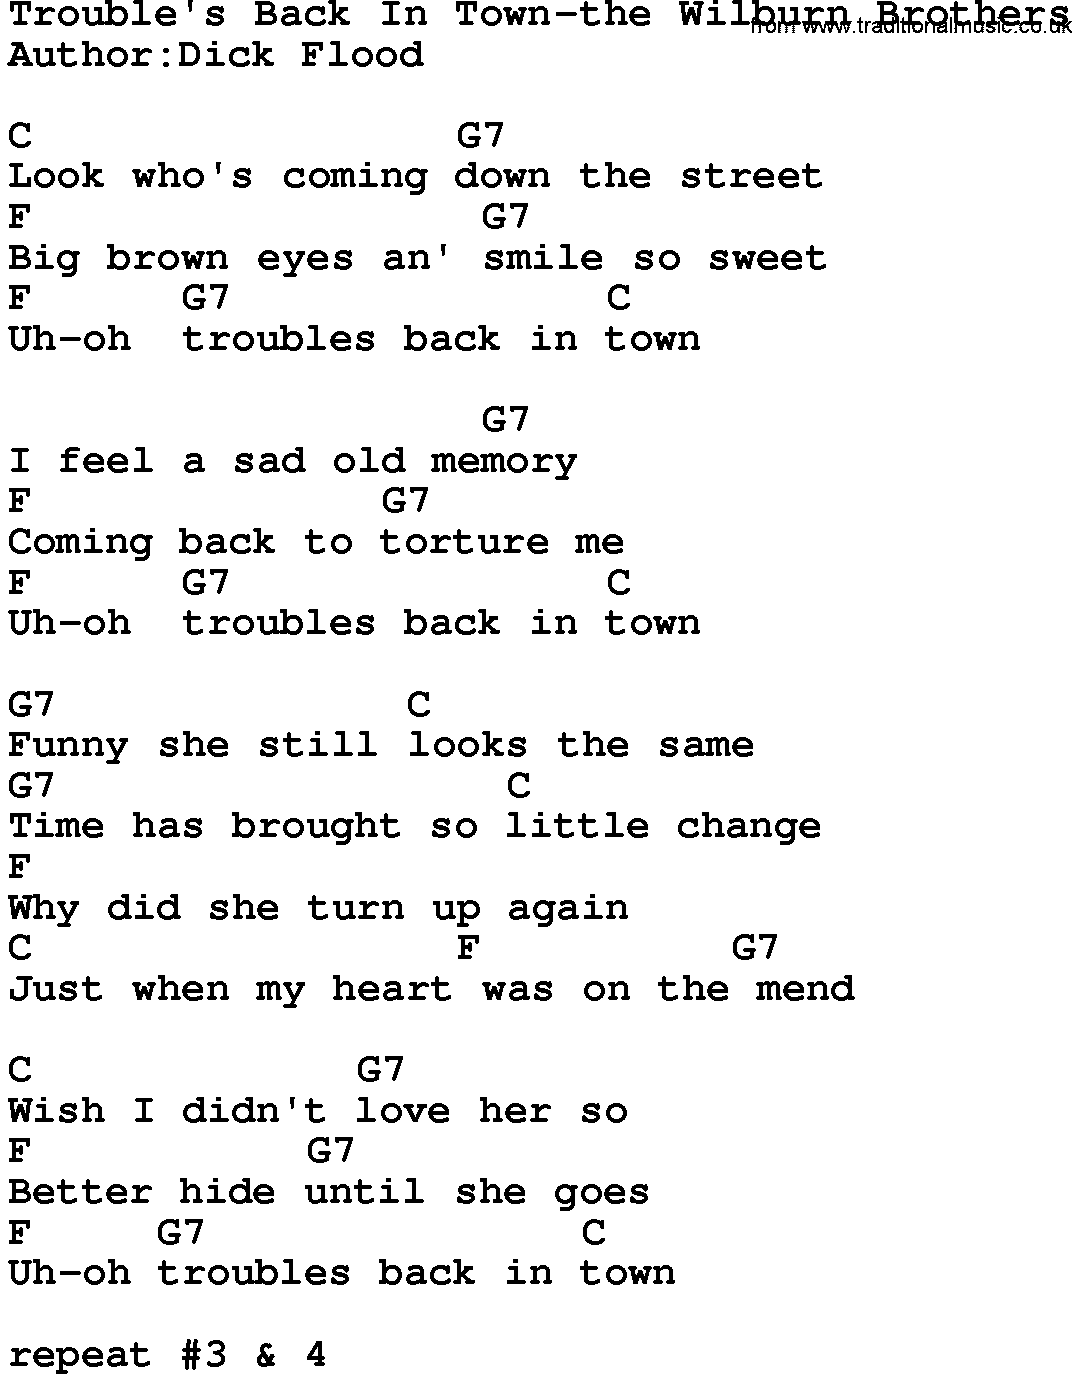 Country music song: Trouble's Back In Town-The Wilburn Brothers lyrics and chords